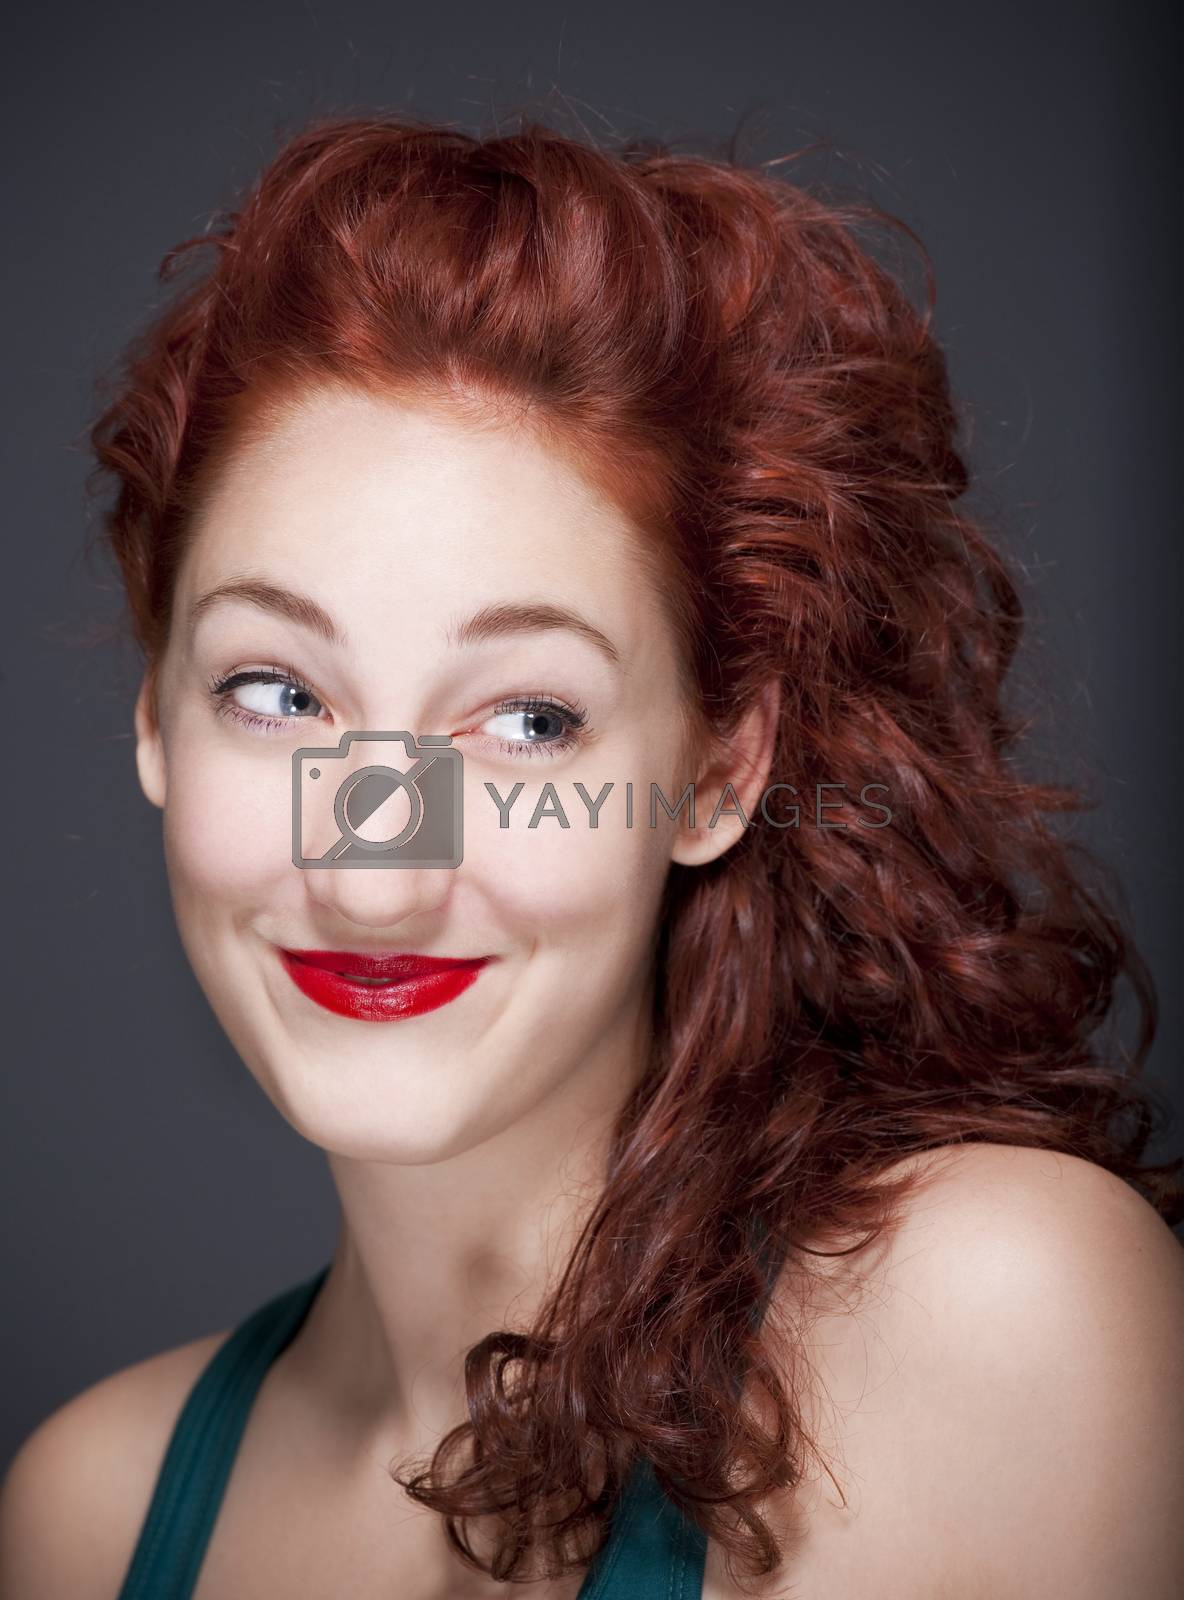 Royalty free image of girl with red hair by courtyardpix